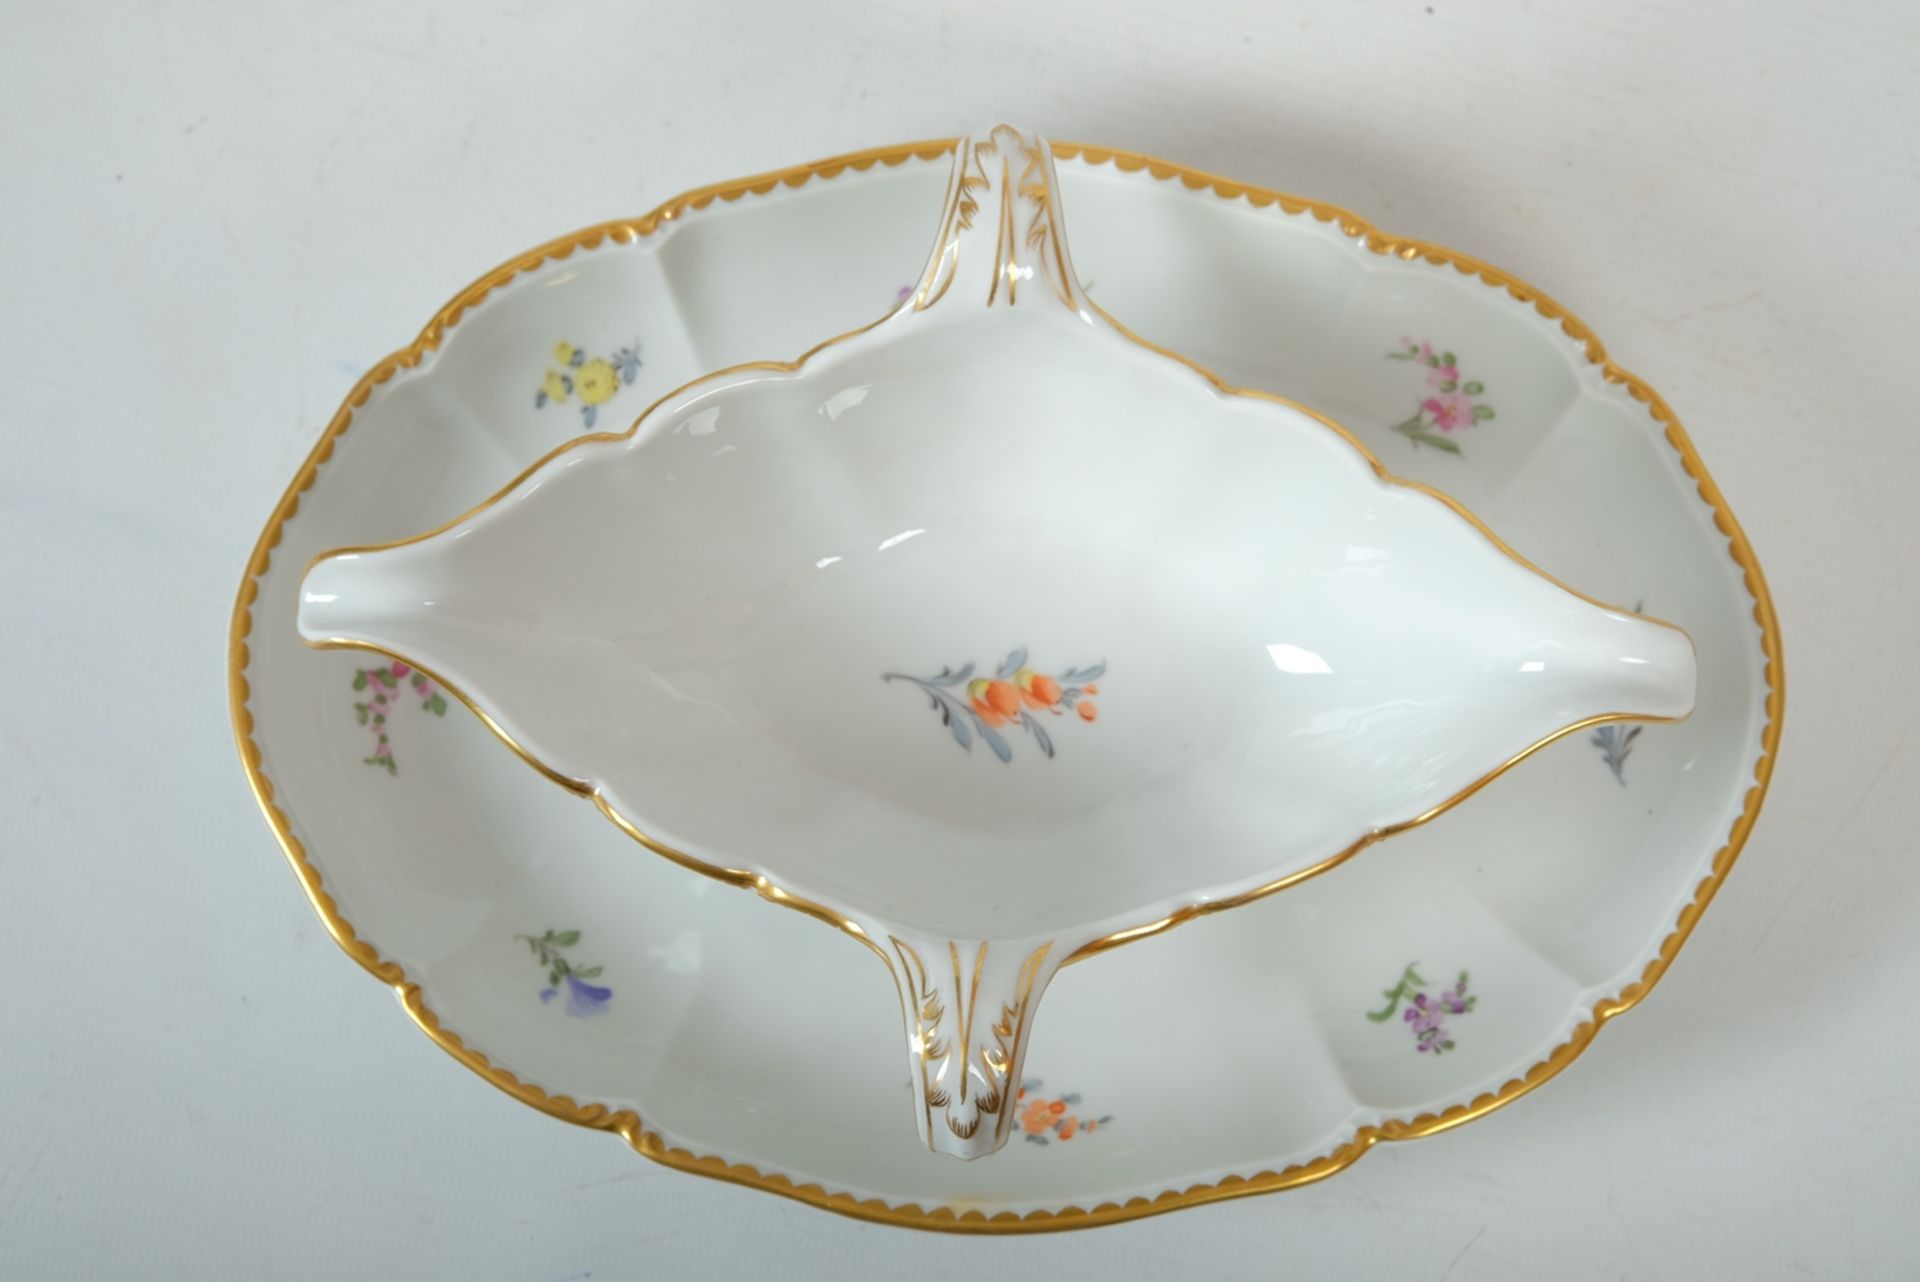 Nymphenburg sauce boat, gold decoration, floral pattern, hand-painted, length 26 cm, width 19 cm - Image 4 of 4